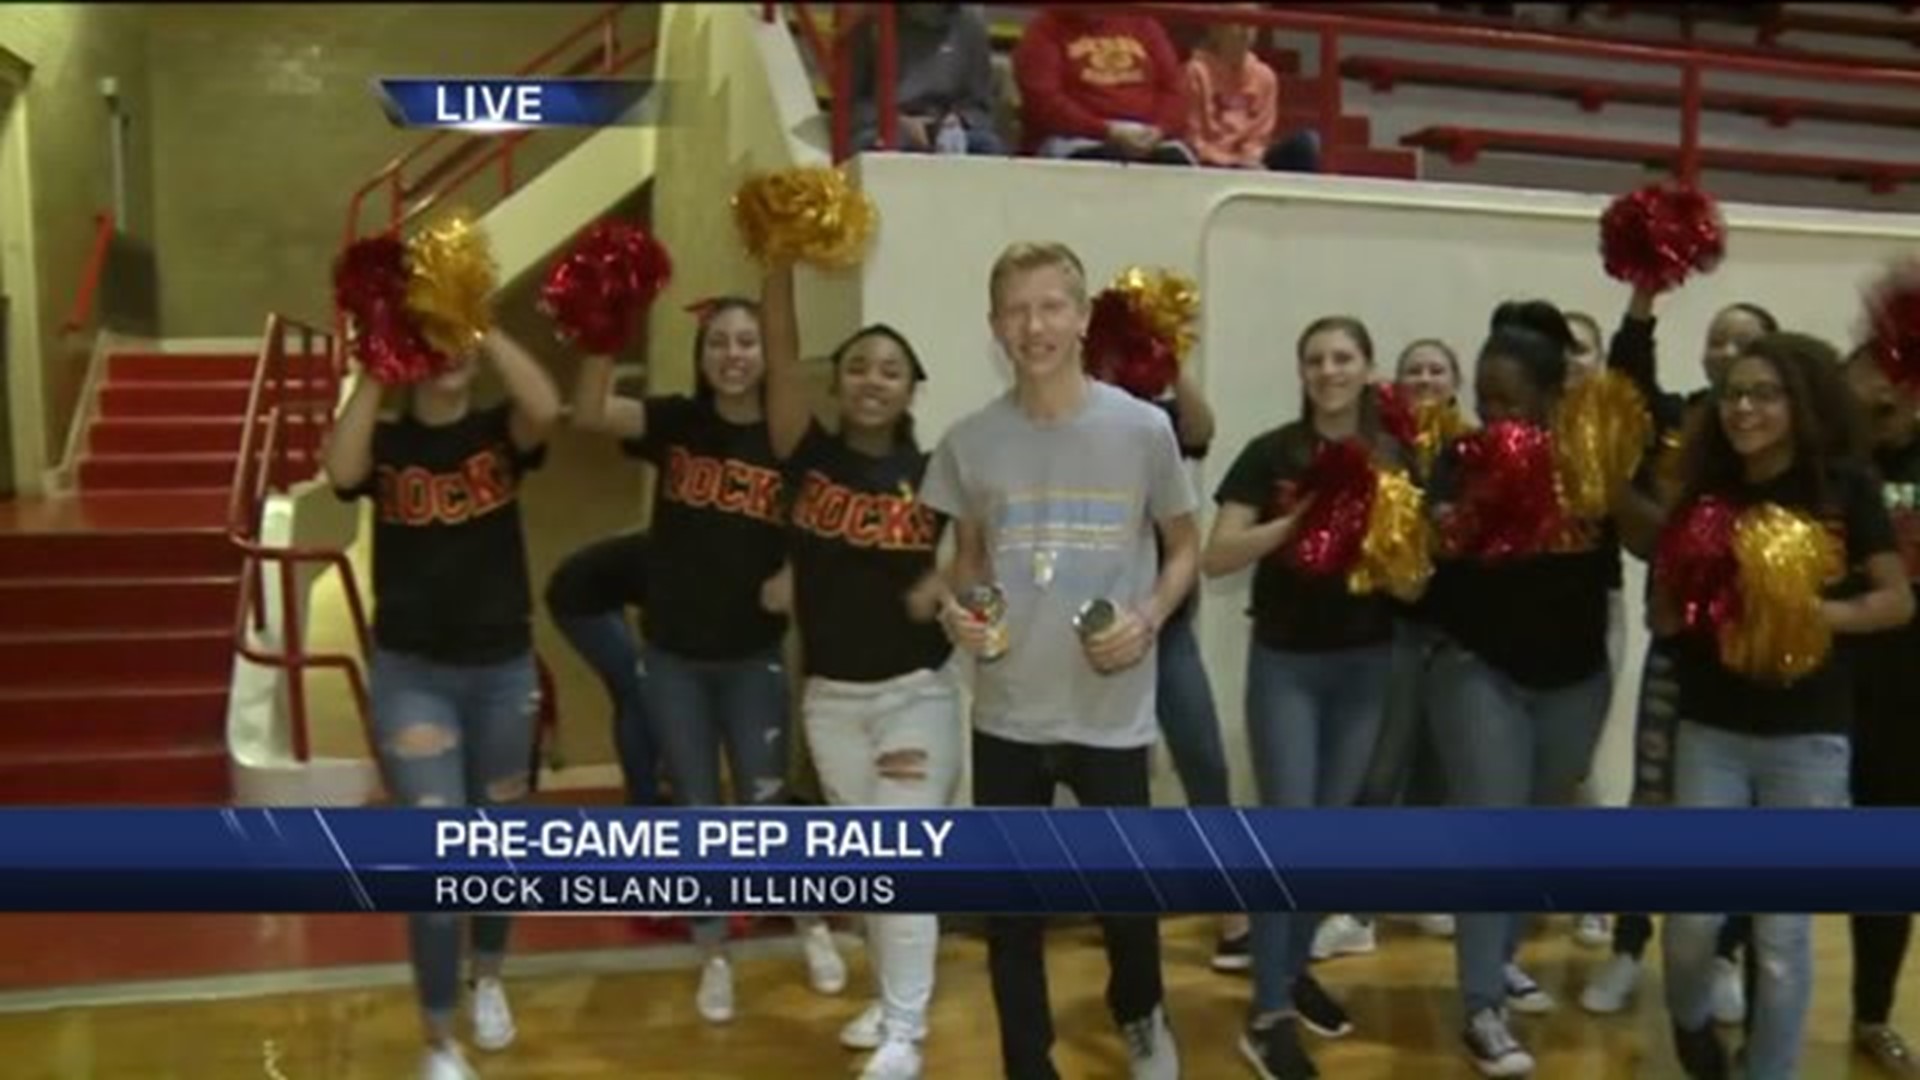 GMQC Score Pre-Game Pep Rally: Part 2